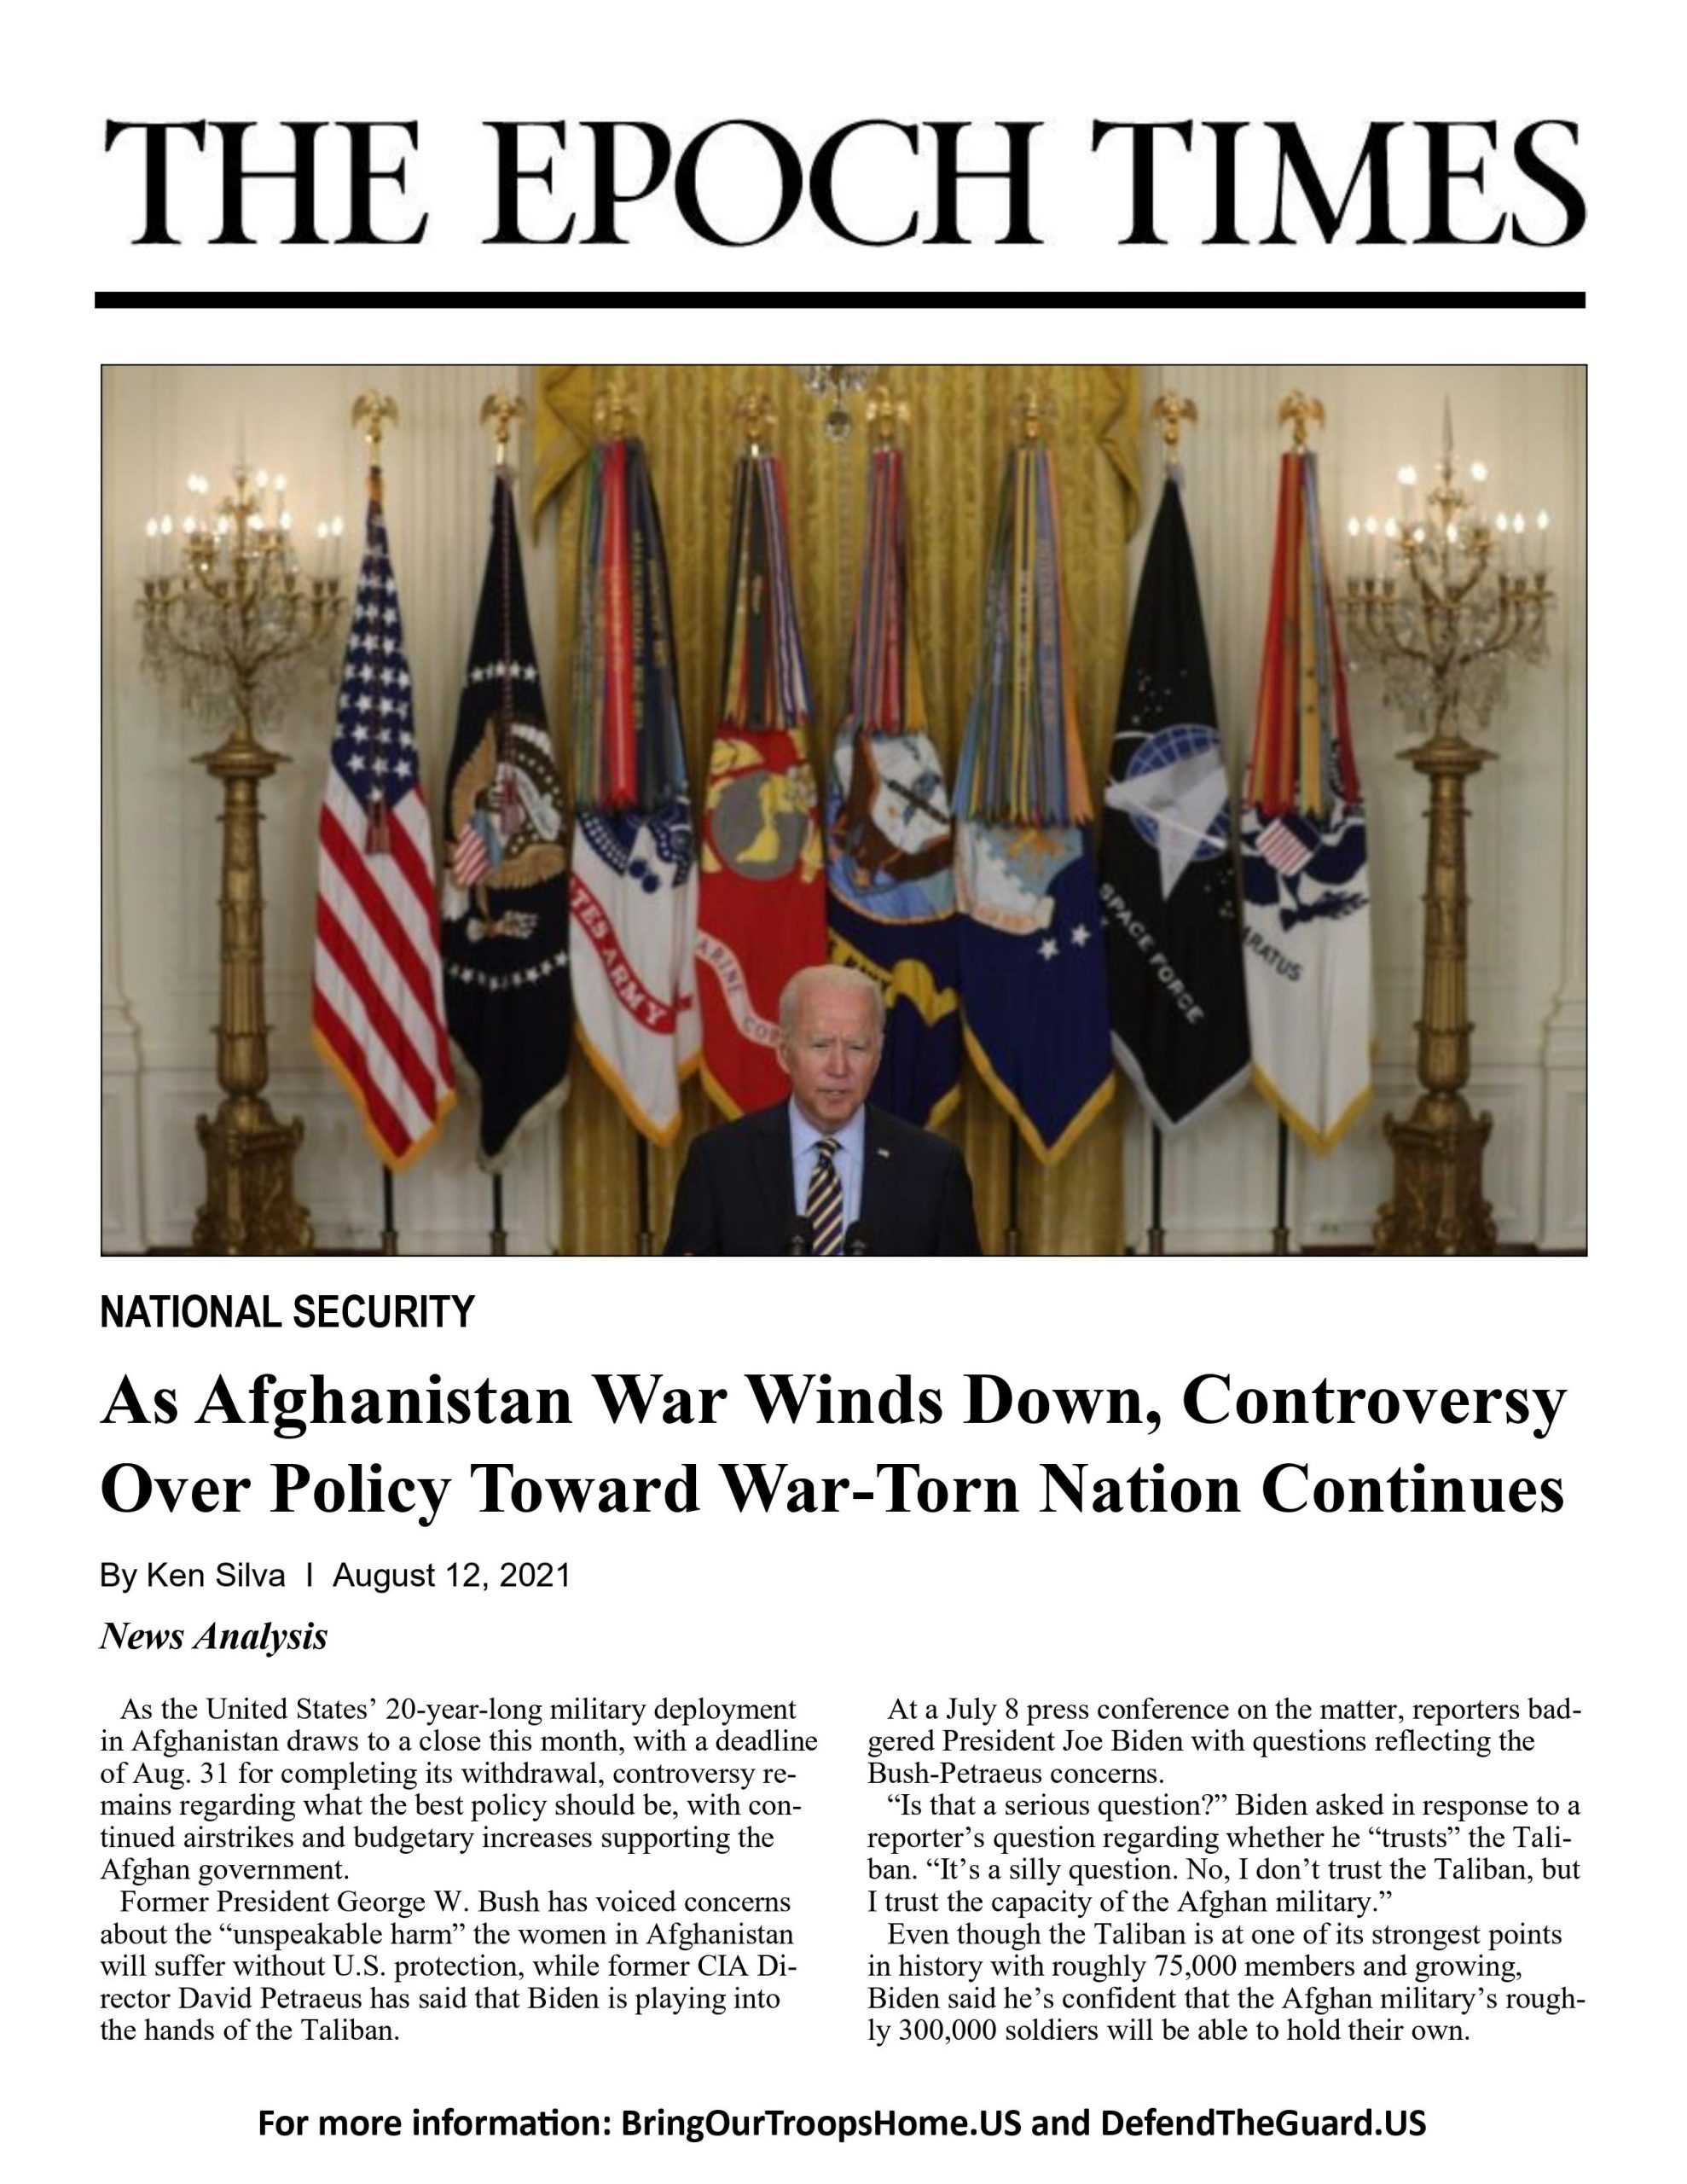 As Afghanistan War Winds Down, Controversy Over Policy Toward War-Torn Nation Continues